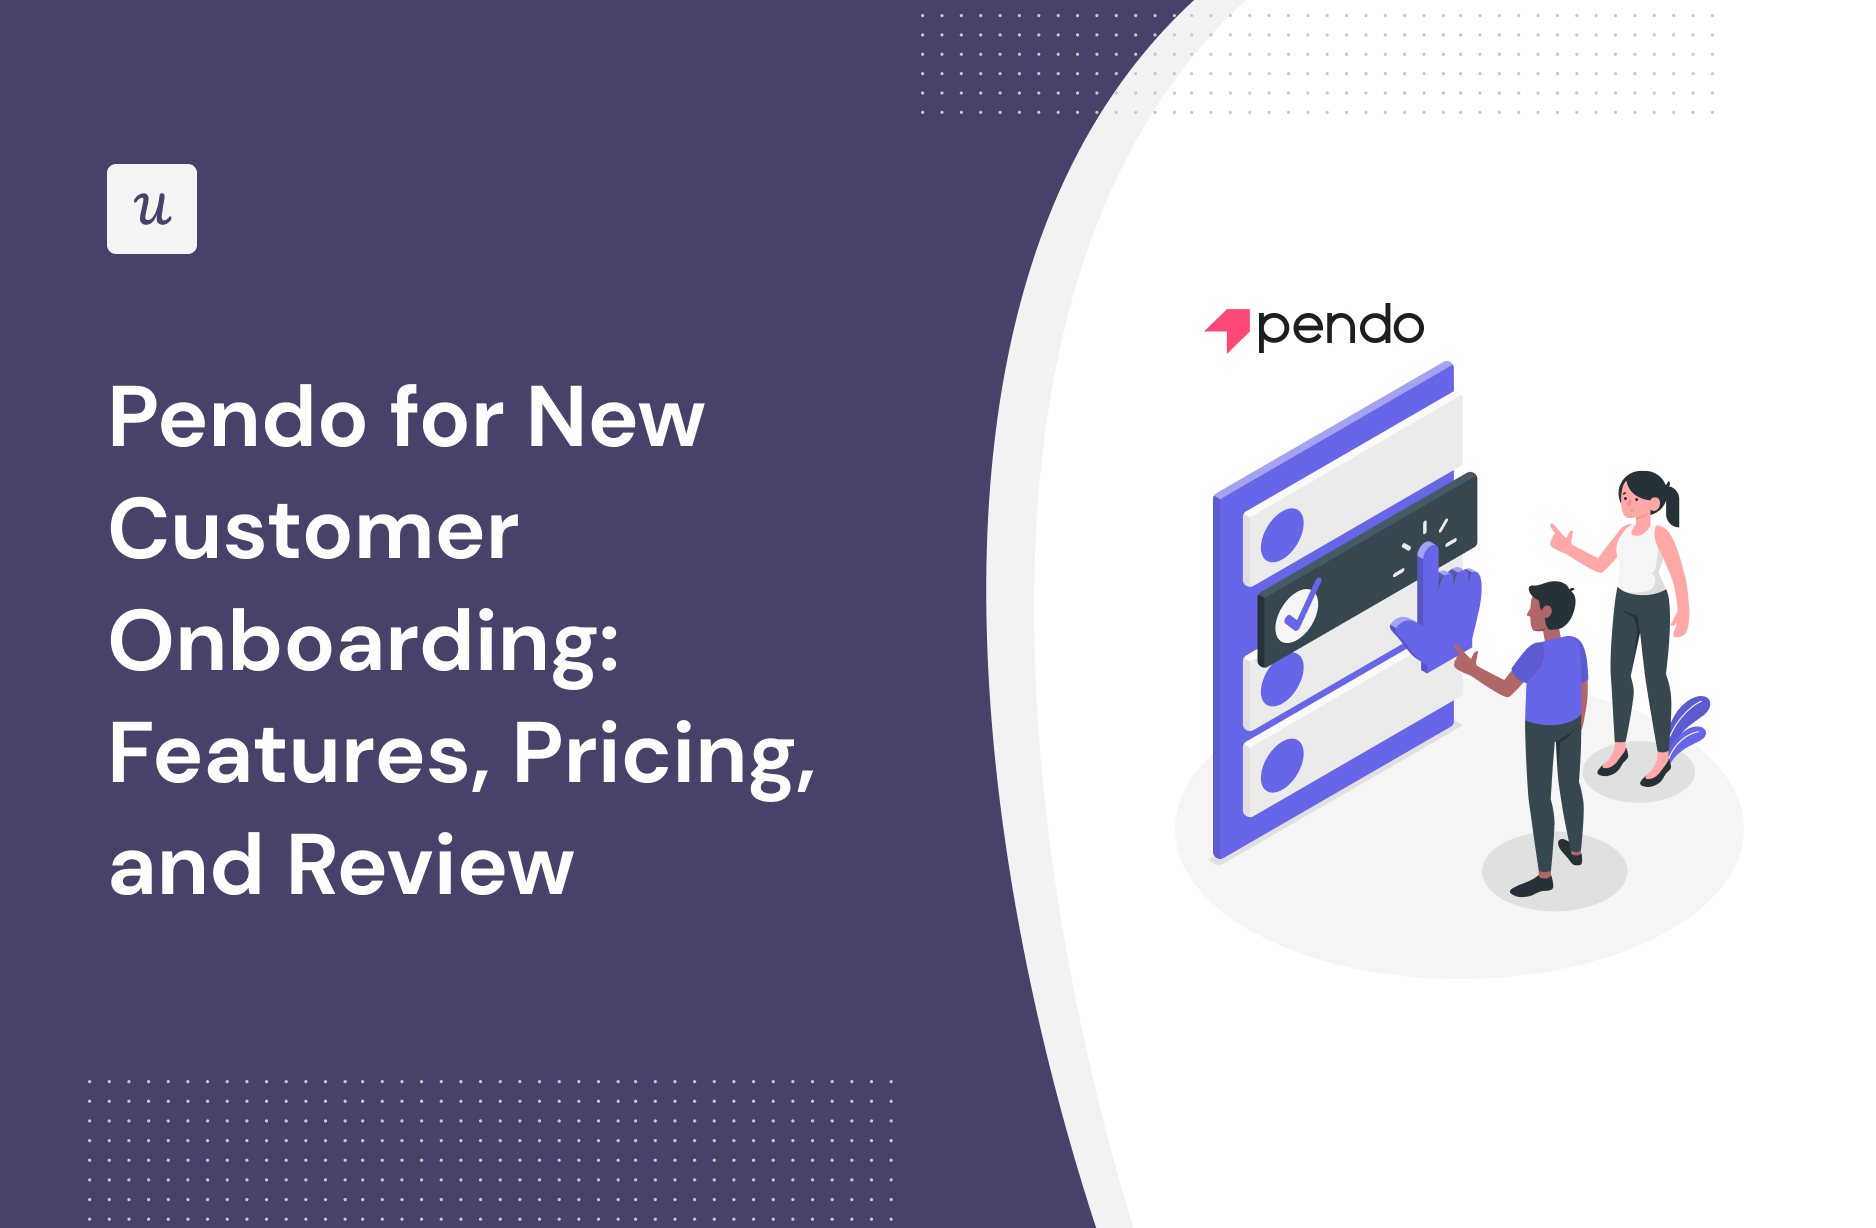 Pendo for New Customer Onboarding: Features, Pricing, and Review